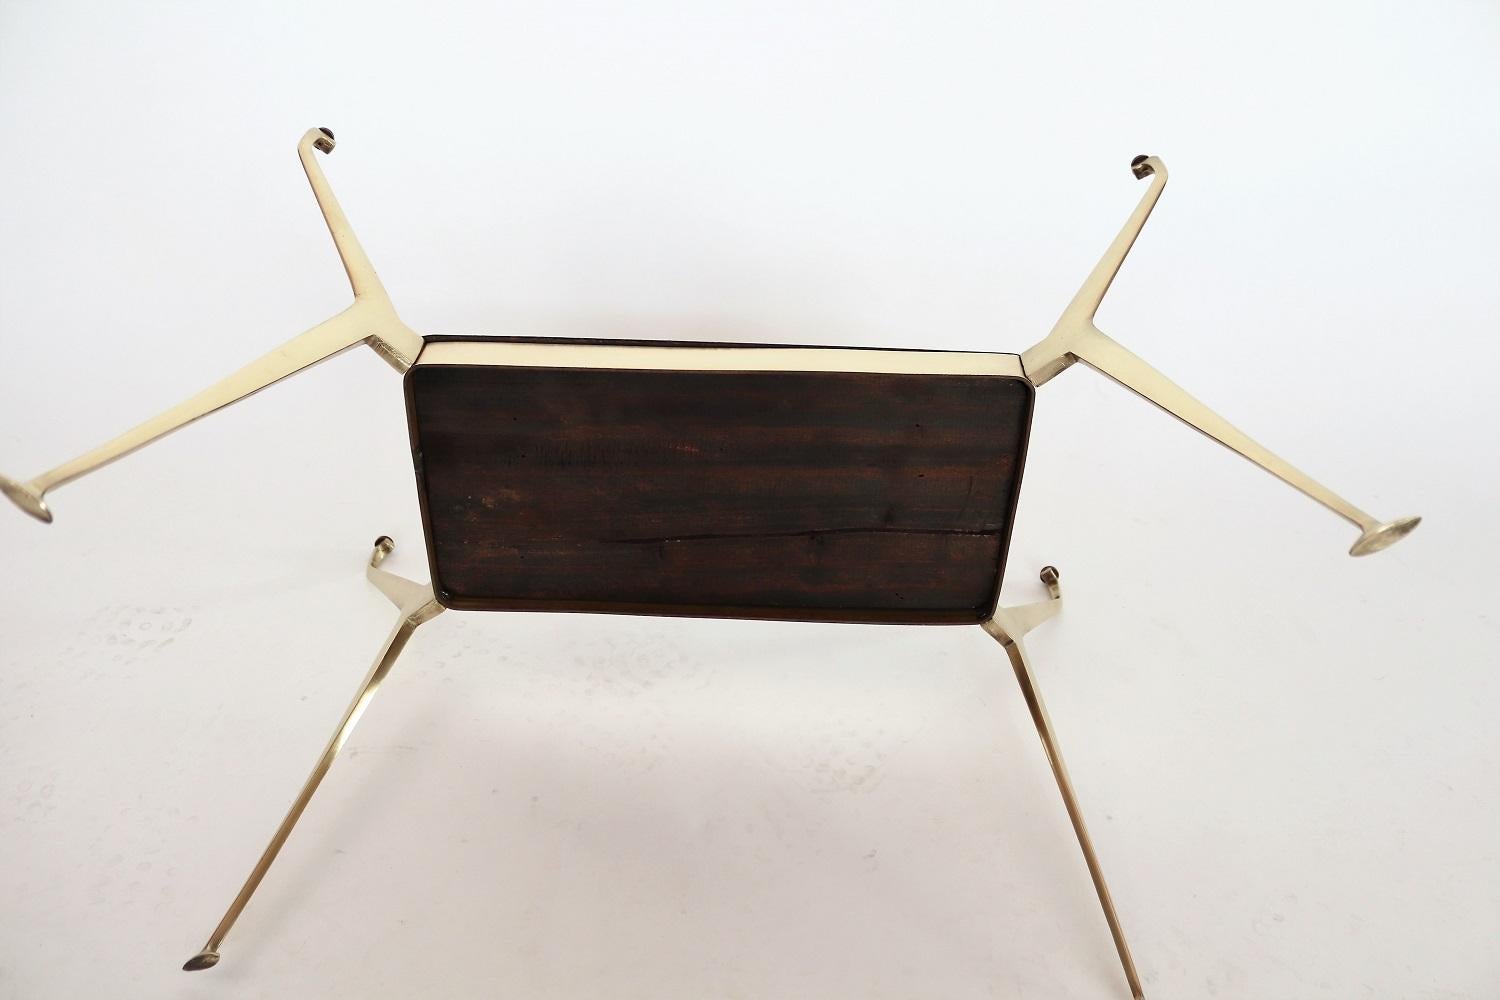 Italian Midcentury Coffee Table or Side Table with Brass and Mahogany, 1950s For Sale 8